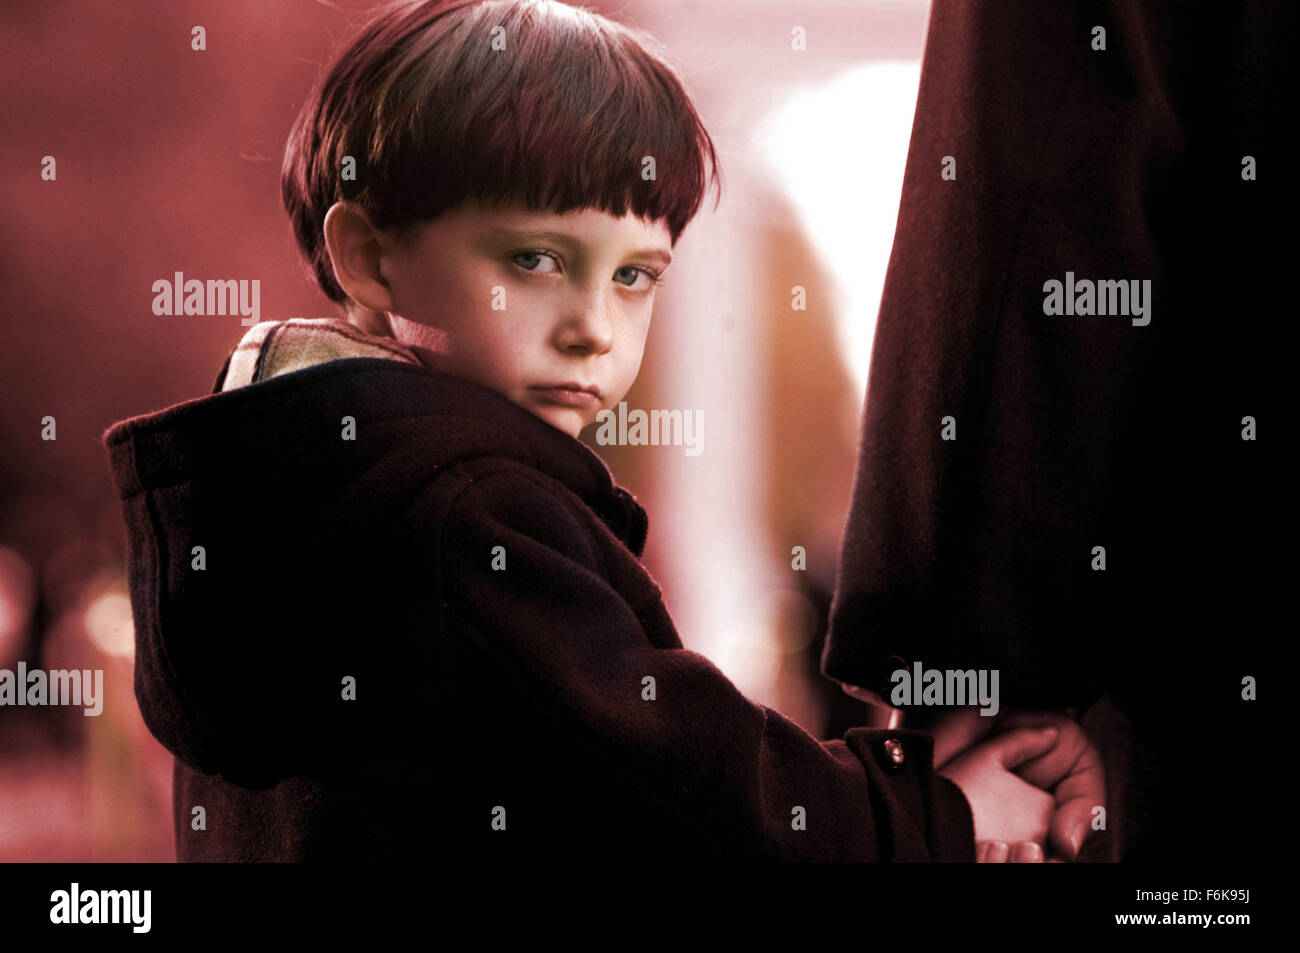 RELEASE DATE: June 6, 2006. MOVIE TITLE: The Omen. STUDIO: 20th Century Fox. PLOT: A remake of the 1976 horror classic The Omen (1976), an American official realizes that his young son may literally be the devil incarnate. PICTURED: SEAMUS DAVEY-FITZPATRICK as Damien. Stock Photo